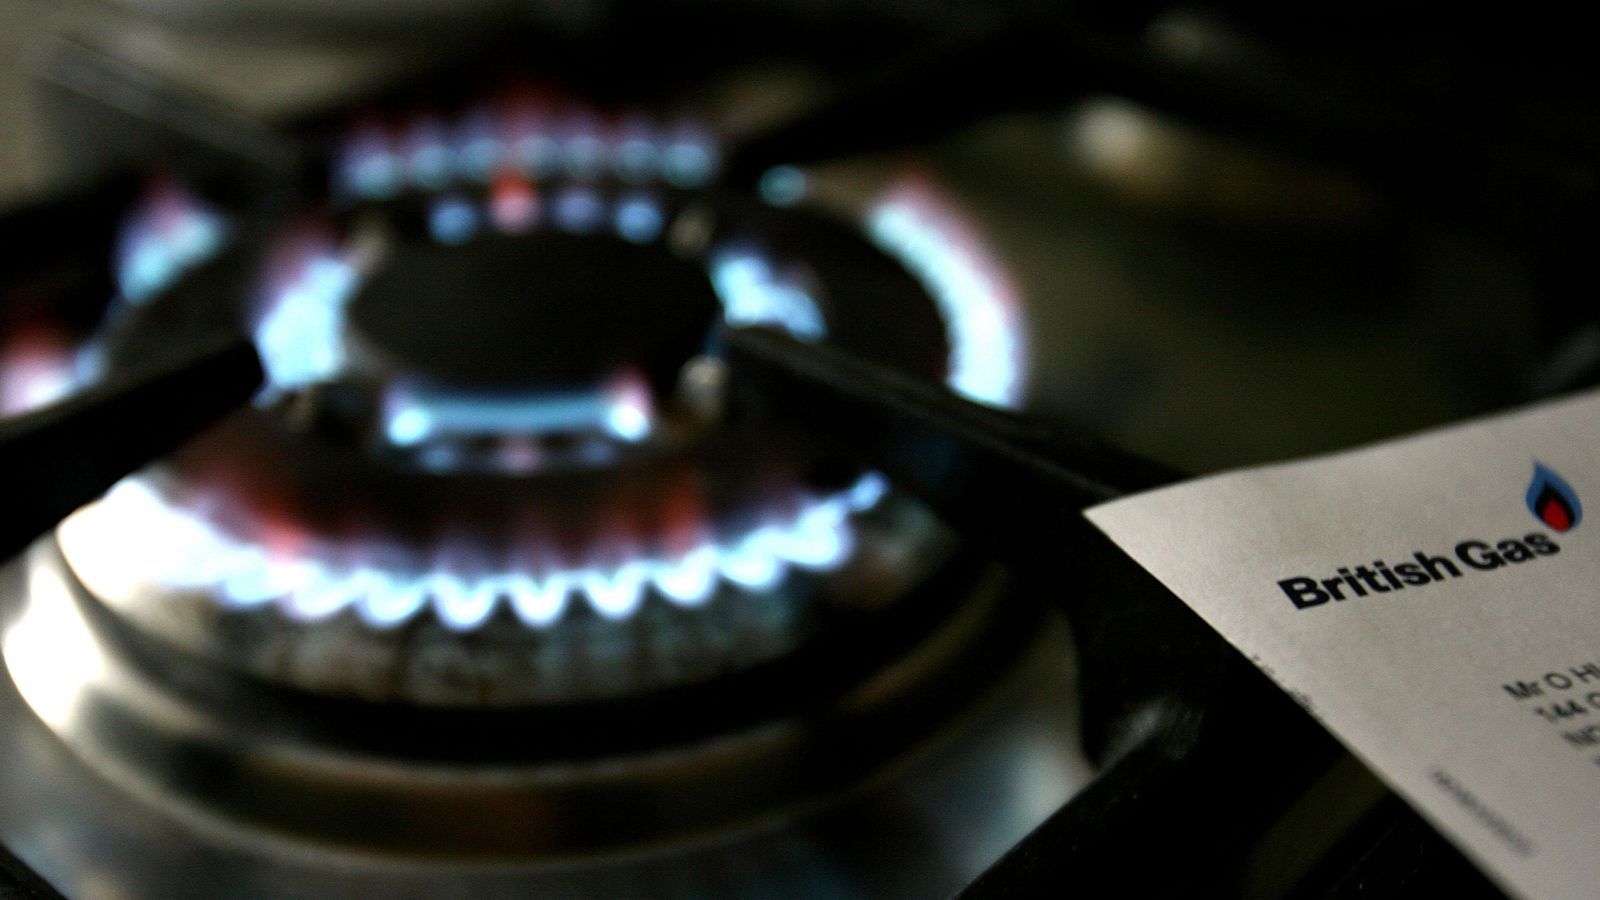 British Gas profit expectations downgraded because of 'warm weather'